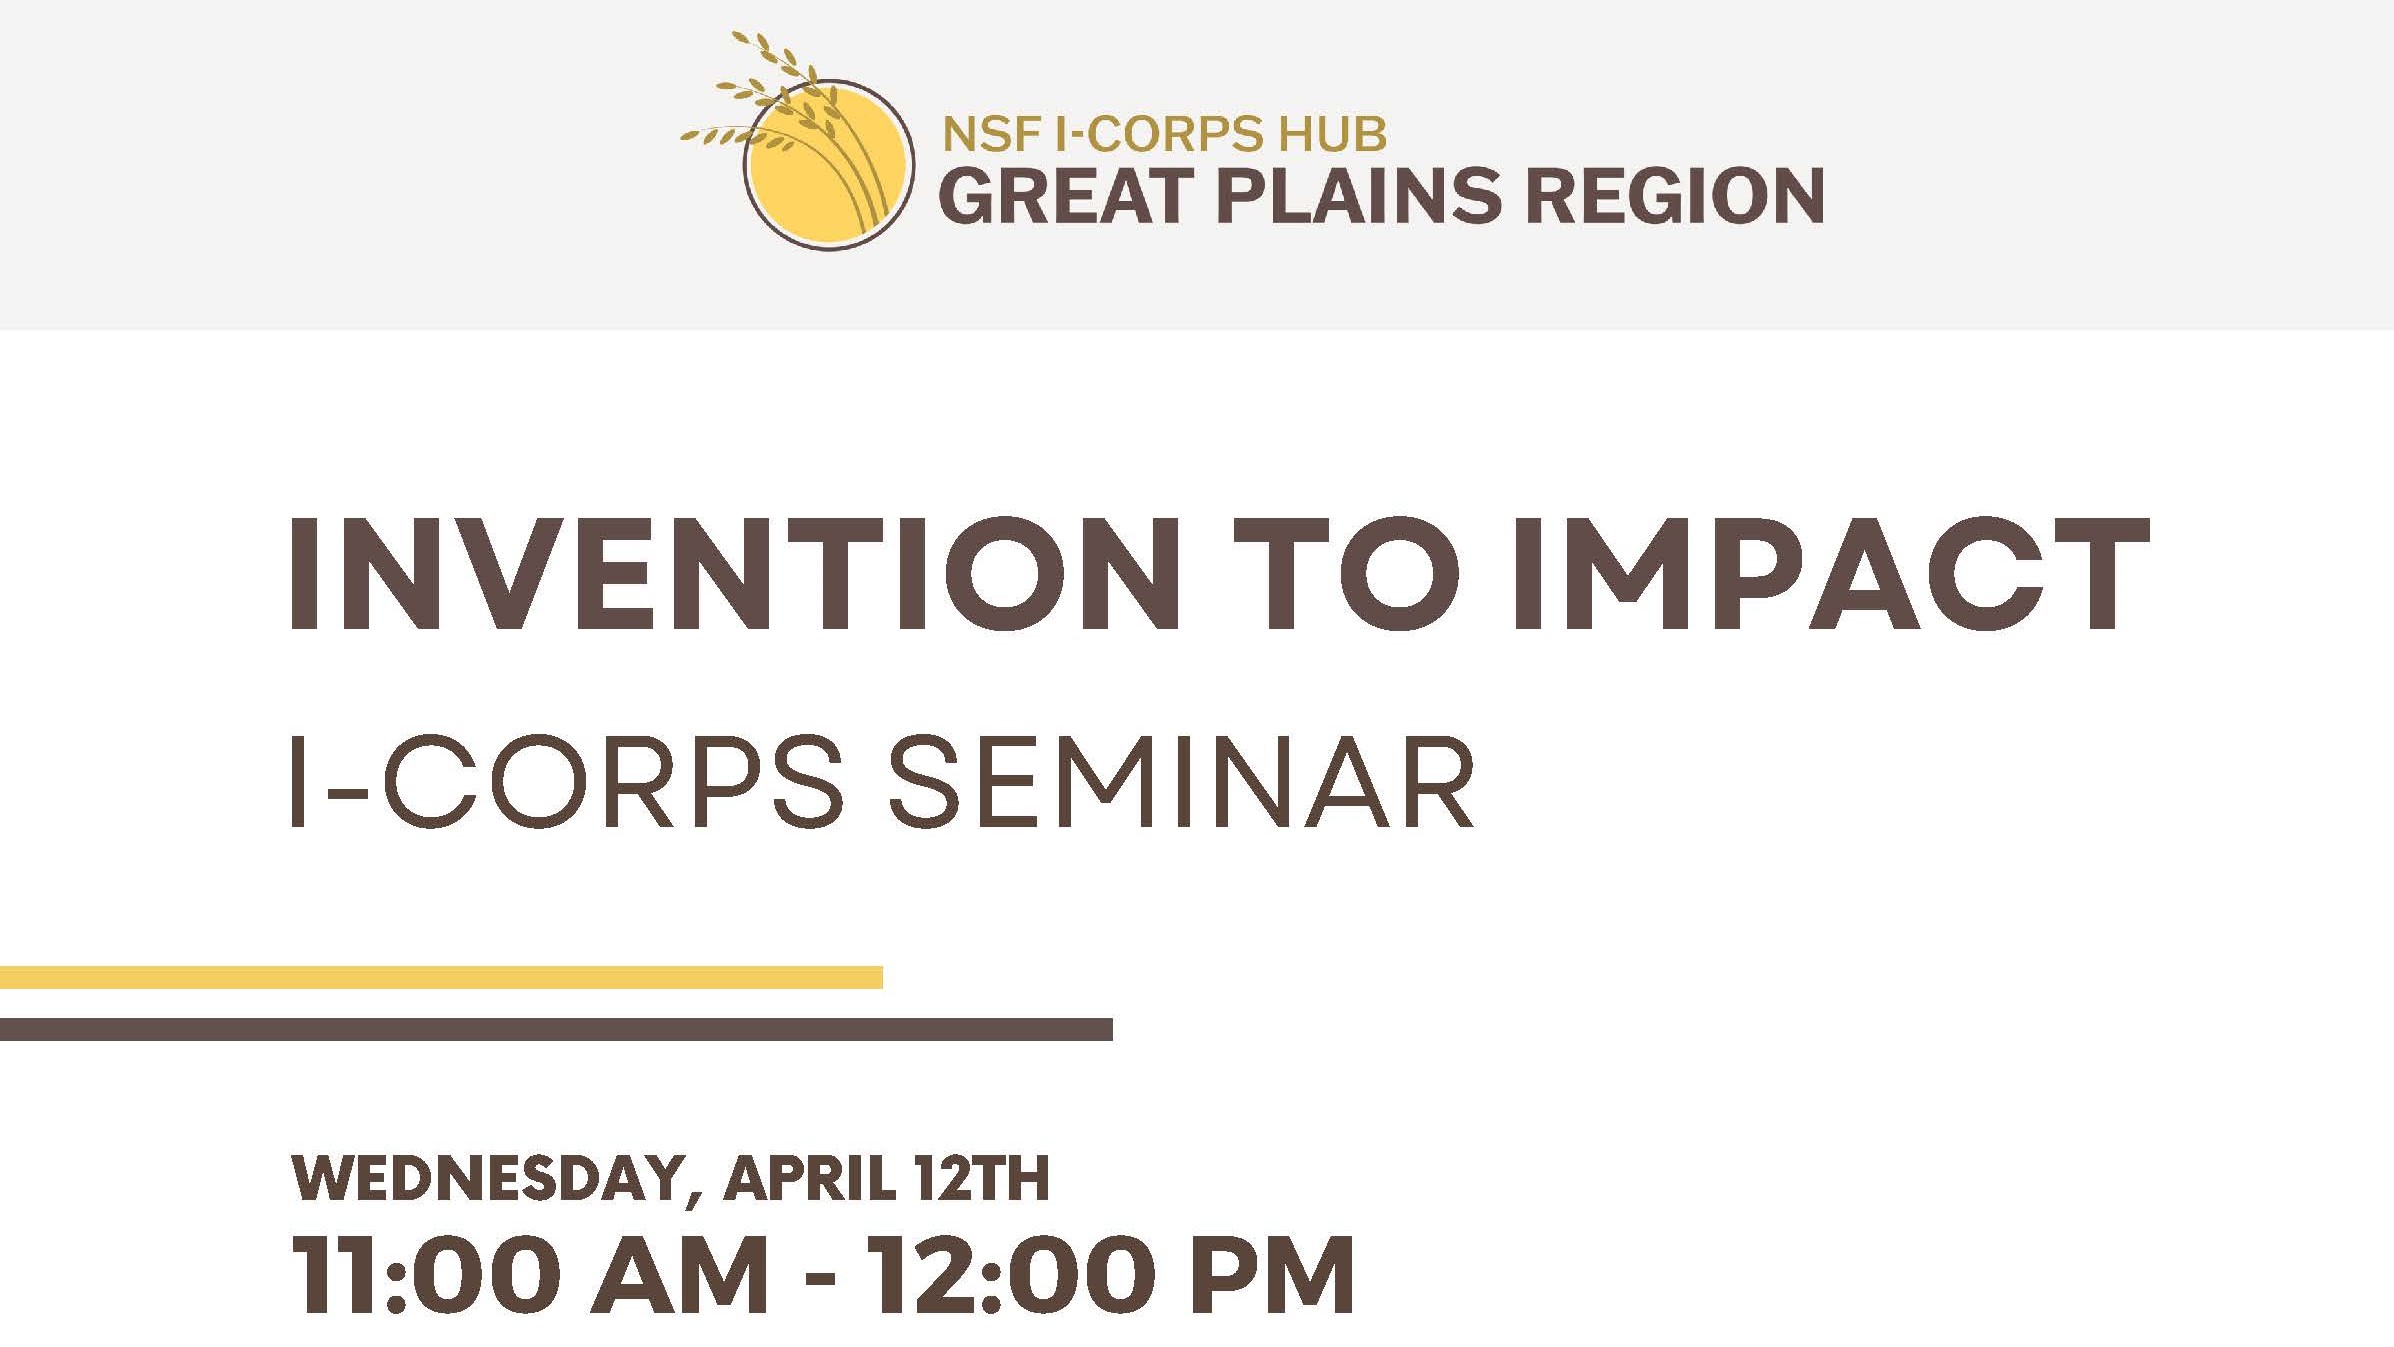 Invention to Impact Great Plains Region Seminar